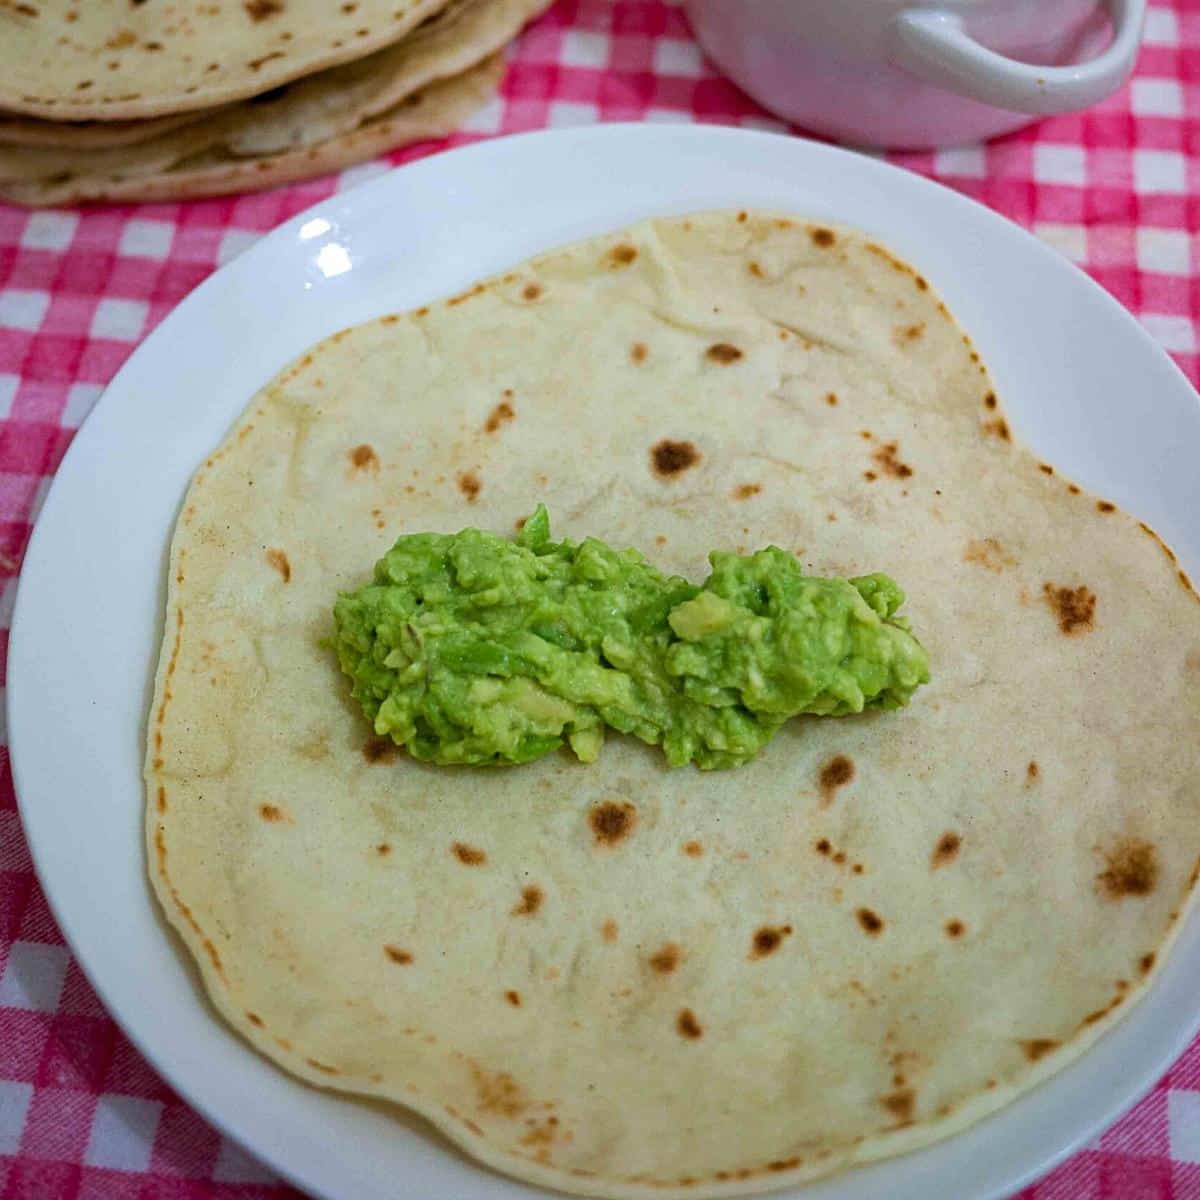 A plate with tortilla and guacamole.